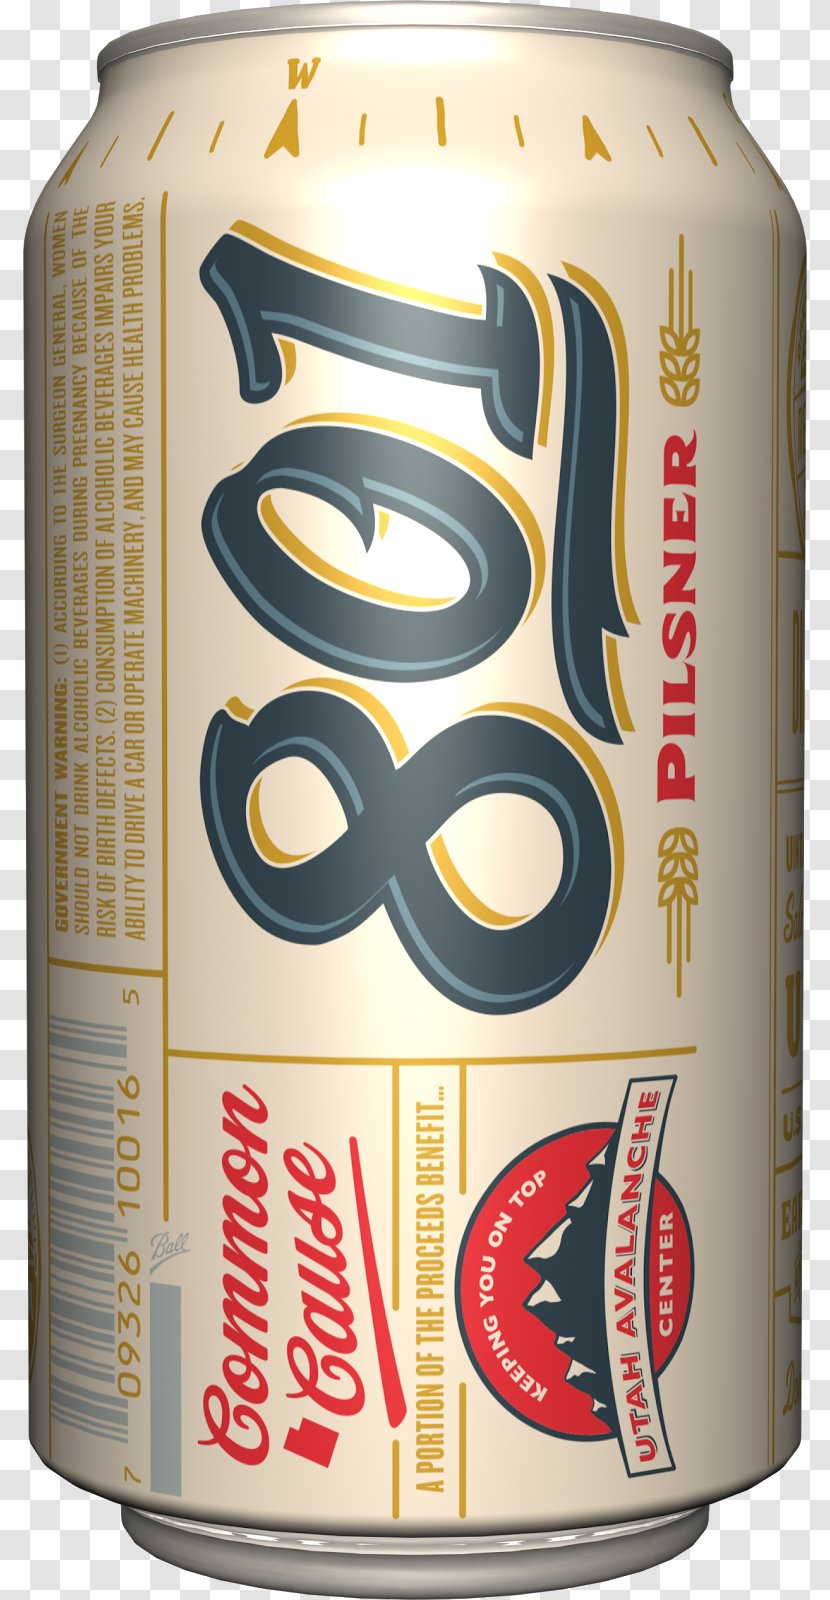 Uinta Brewing Co Pilsner Fizzy Drinks Brewery Aluminum Can - Drink - Ratebeercom Transparent PNG